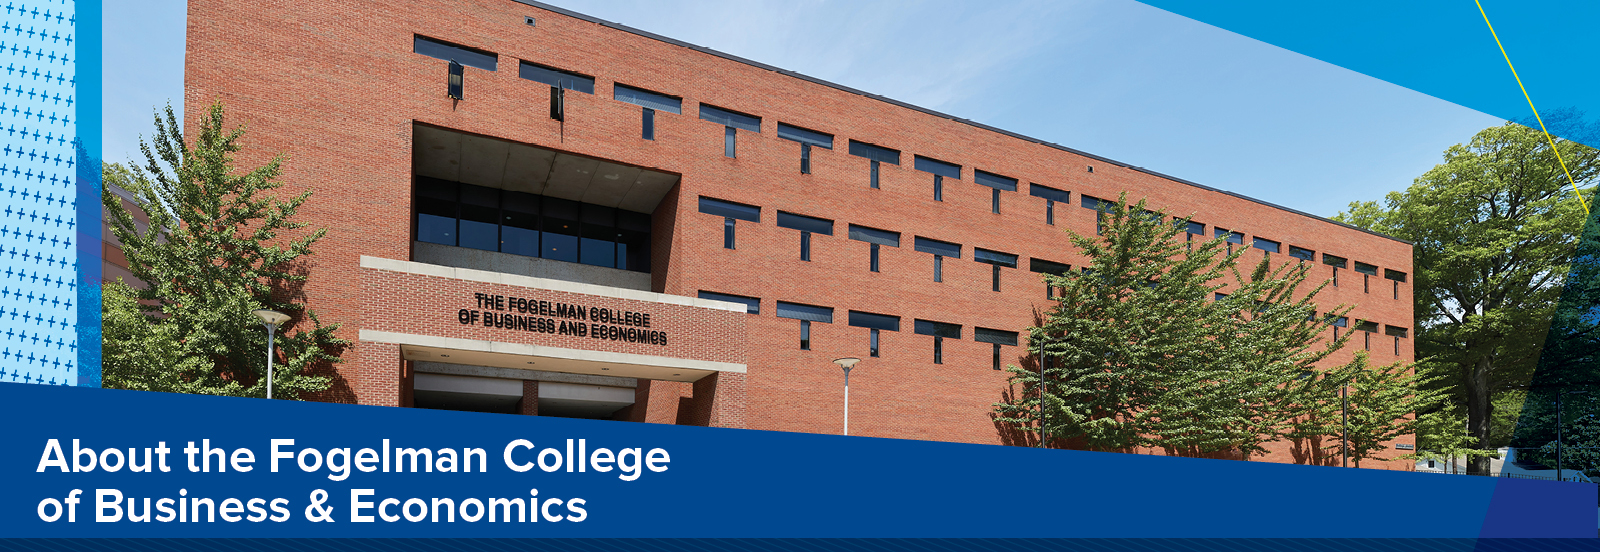 About the Fogelman College of Business & Economics